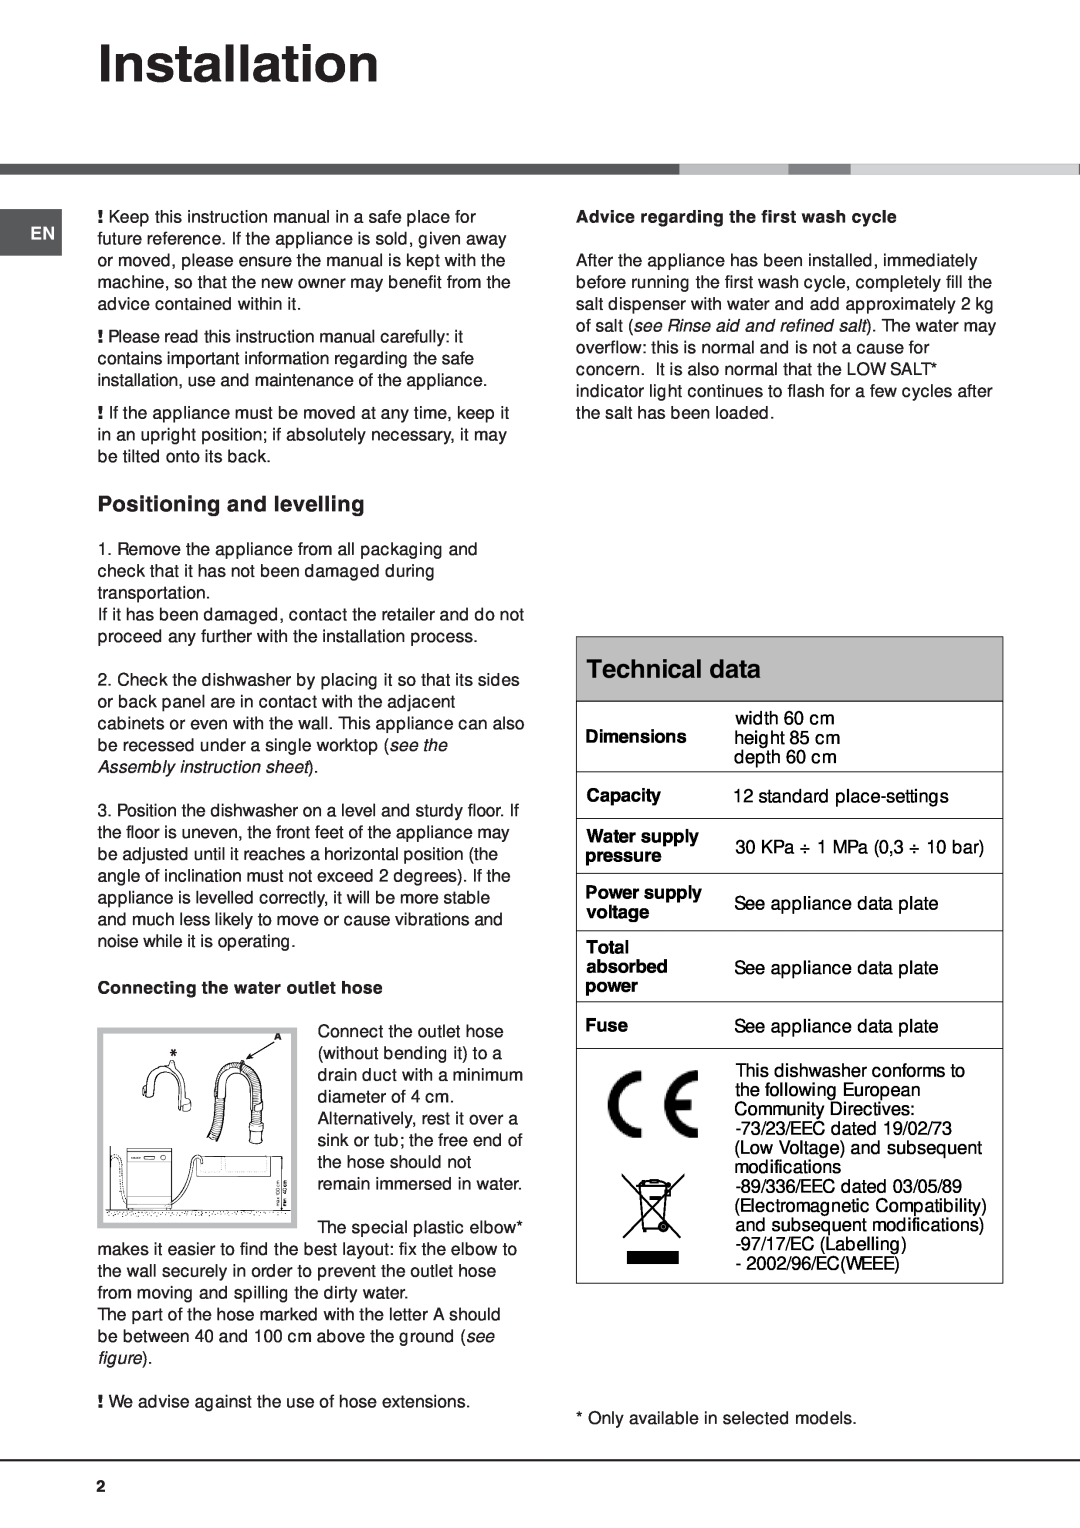 Hotpoint FDW 75 manual Installation, 7HFKQLFDOGDWD, Assembly instruction sheet, Connecting the water outlet hose, Lphqvlrqv 